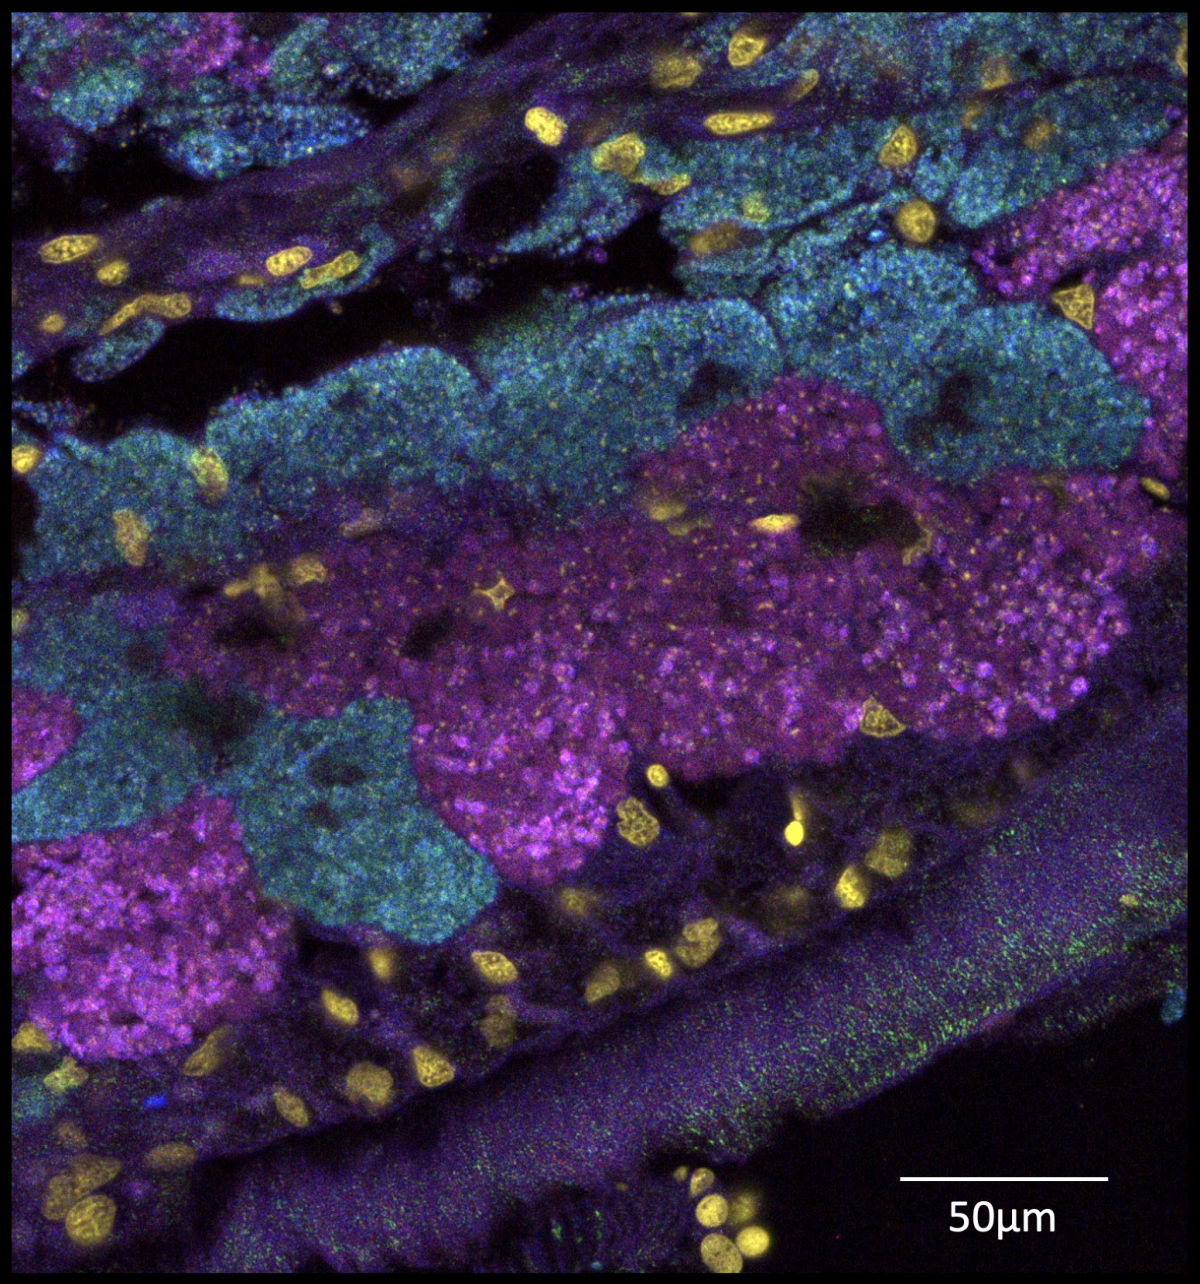 Fluorescence microscopy reveals that lucinid gills are packed with symbionts. Lucinids host them in specialized cells called bacteriocytes. Bacterial symbionts are labeled in green and magenta, host nuclei in gold. (© Lukas Leibrecht)